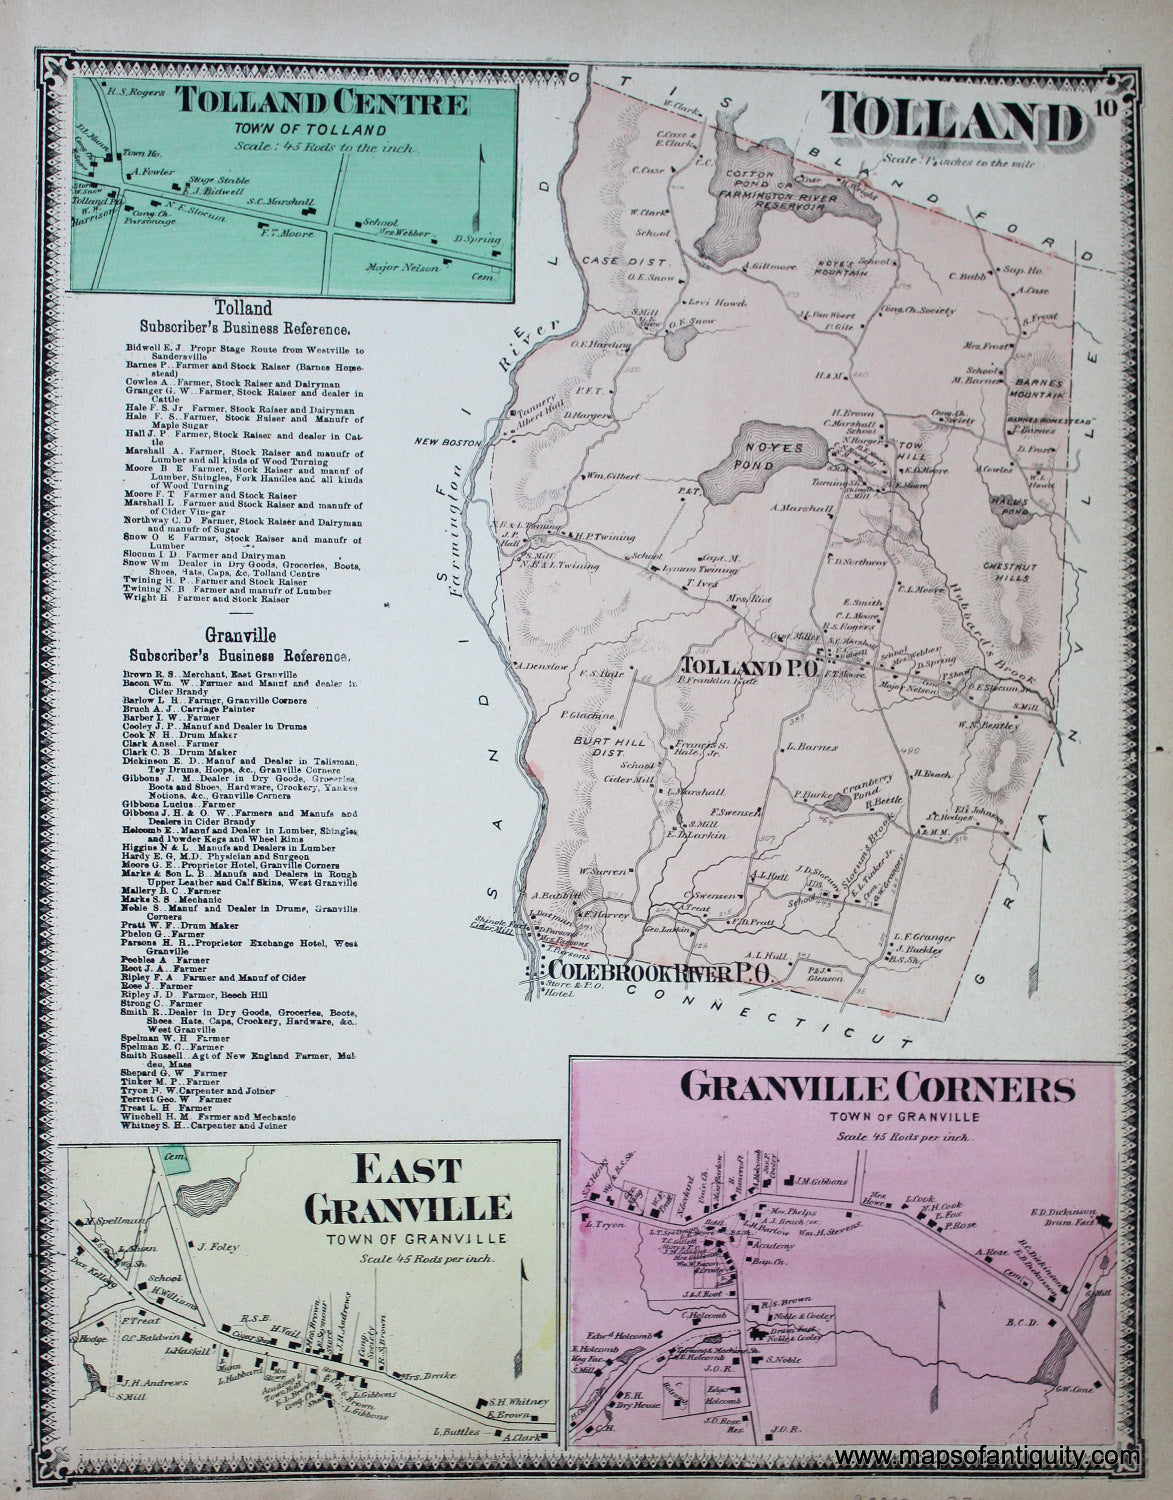 Antique-Hand-Colored-Map-Tolland-Granville-Corners-East-Granville-(MA)-p.-10-Massachusetts-Hampden-County-1870-Beers-Ellis-and-Soule-Maps-Of-Antiquity